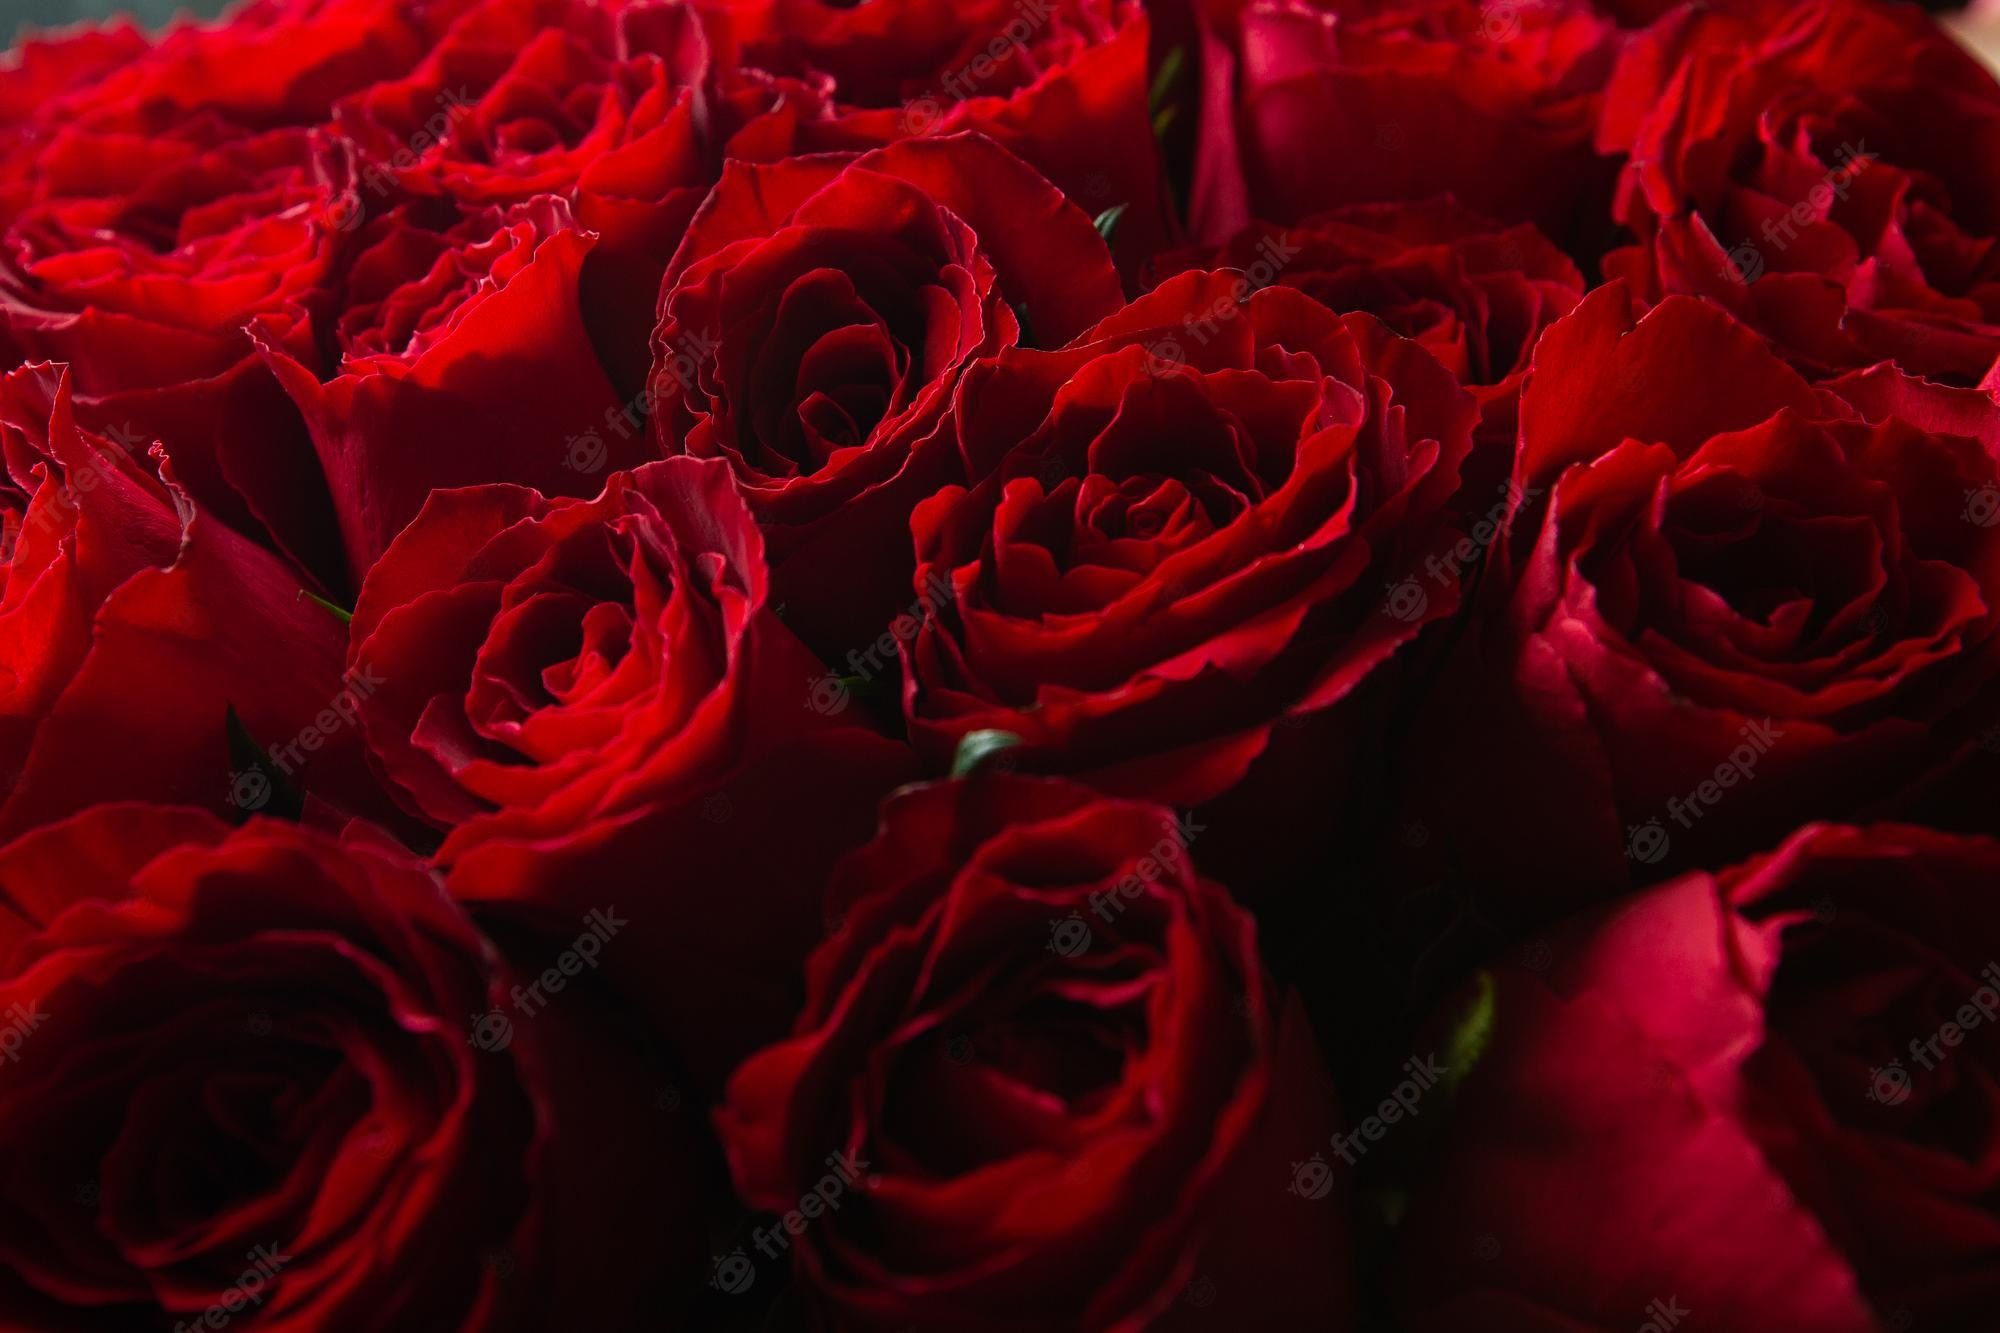 Premium Photo. Bouquet of beautiful red roses trend color classic red valentine's day selective focus roses wallpaper background